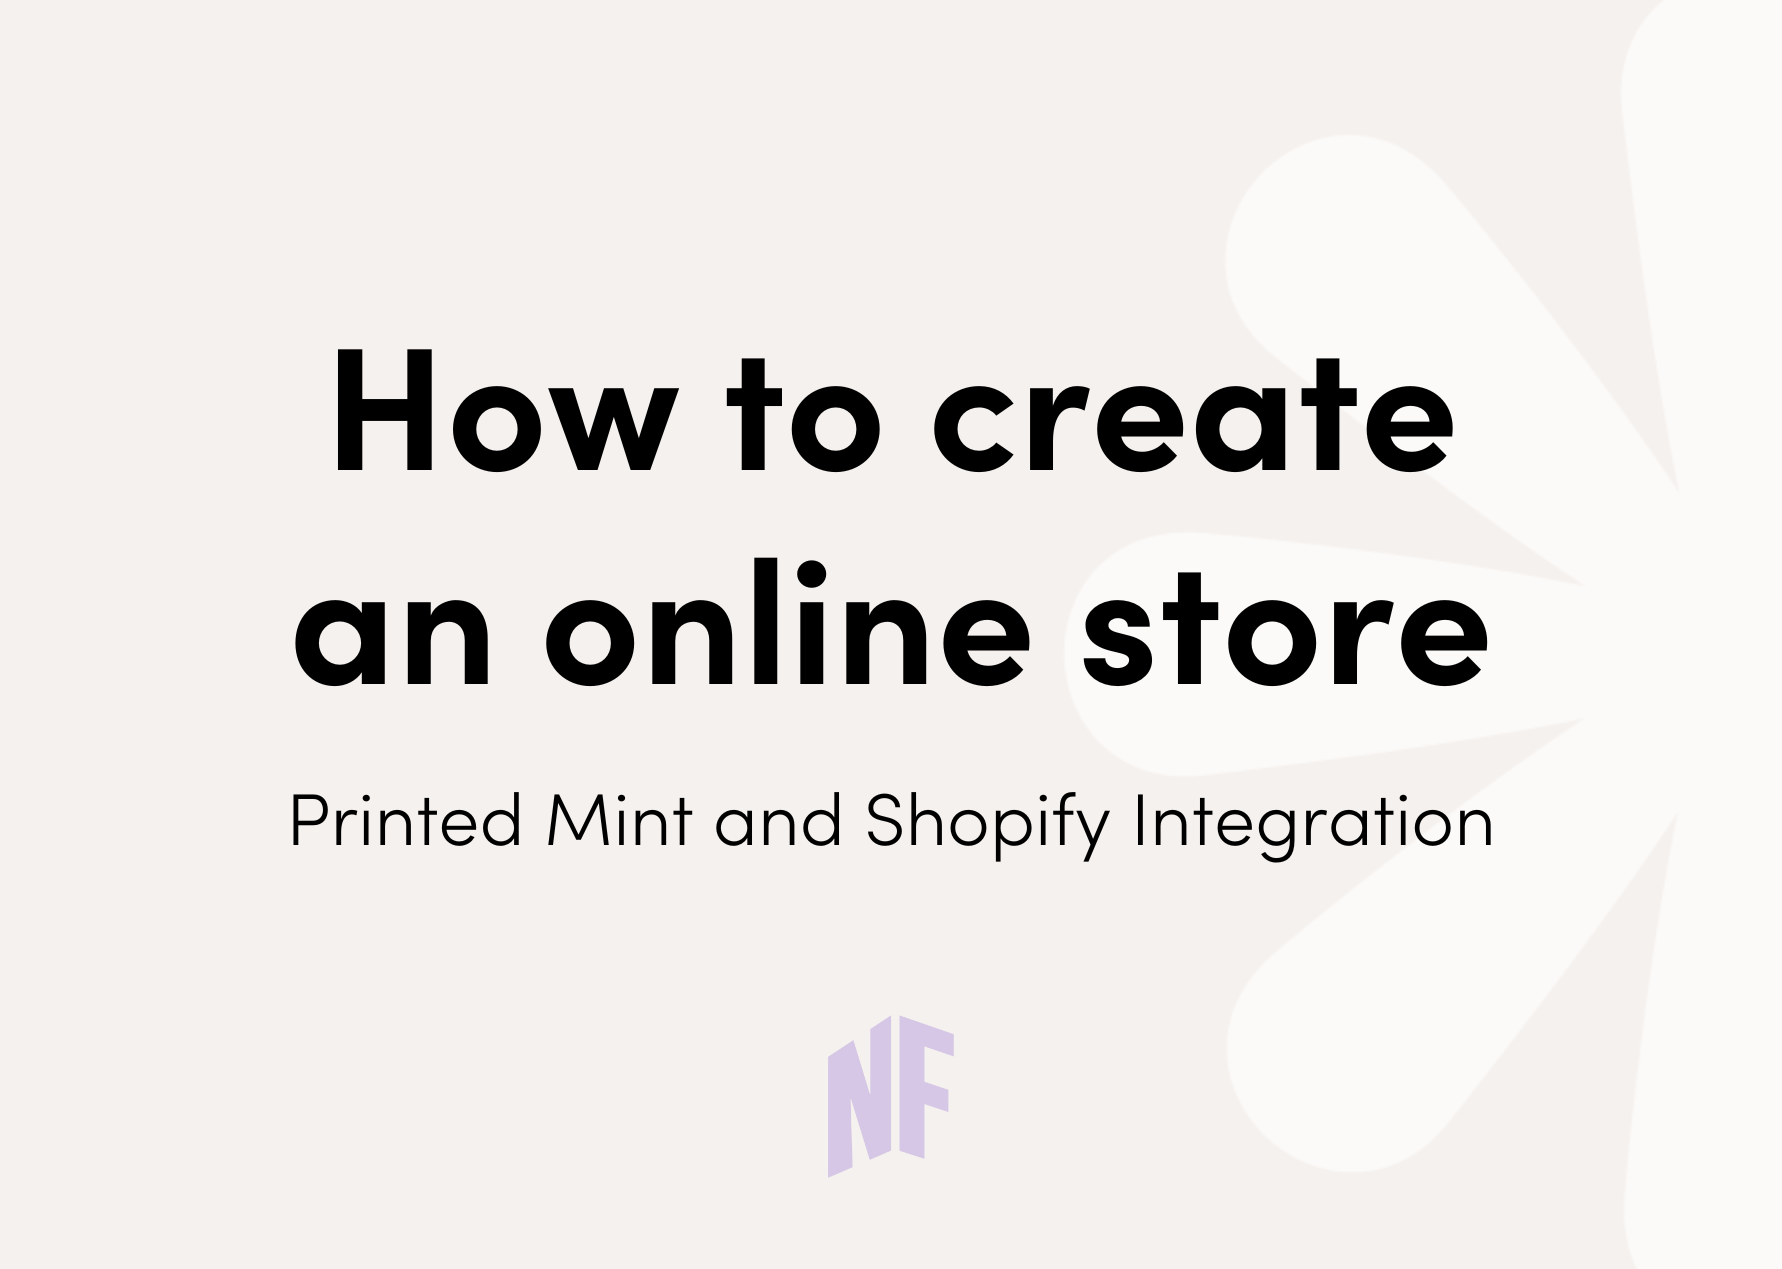 How to Create an Online Store: Printed Mint and Shopify